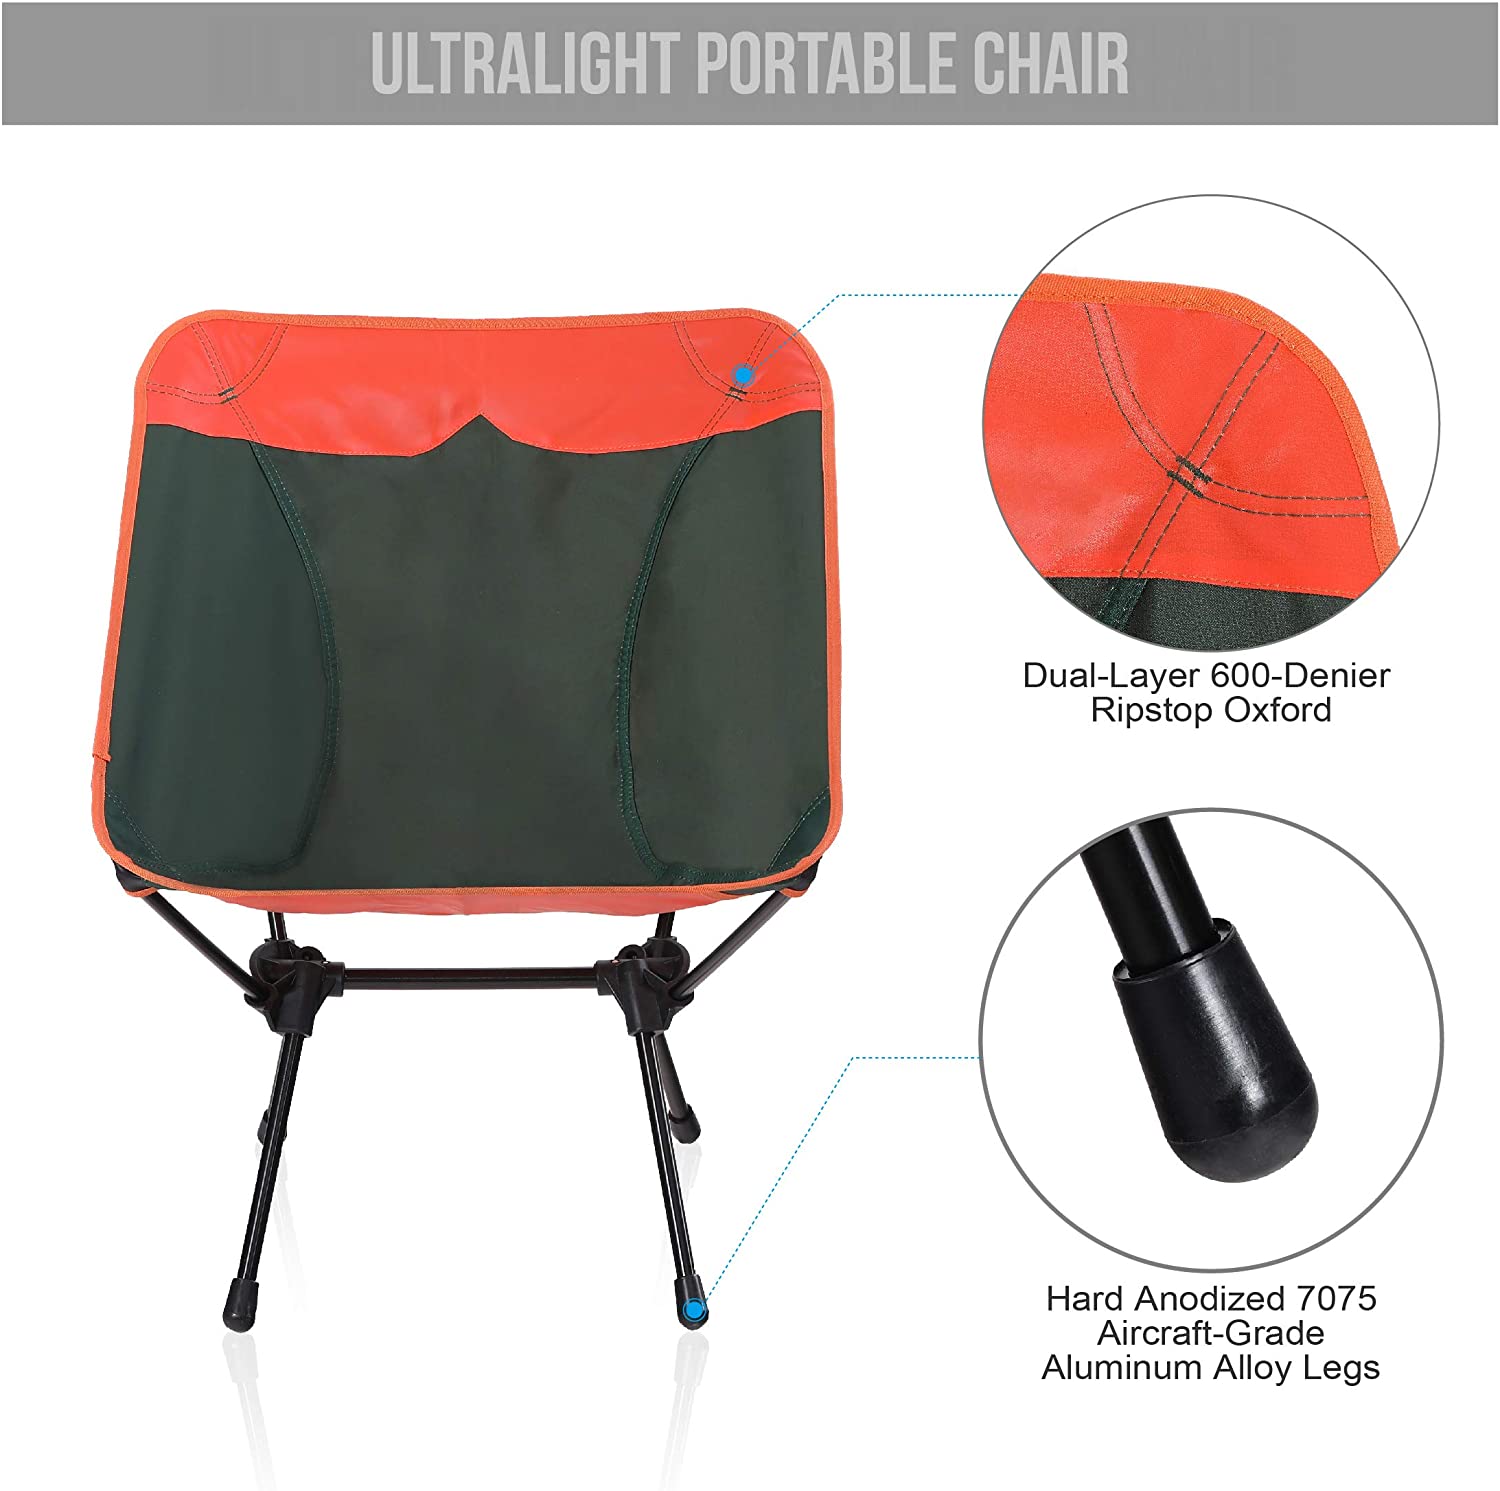 MF Studio Camping Chair Portable Ultralight Compact Folding Camping Backpack Chairs with Carry Bag Heavy Duty 225lb Capacity Compact Lightweight Folding Chair for The Outdoors, Camping, Hiking,Orange - image 4 of 6